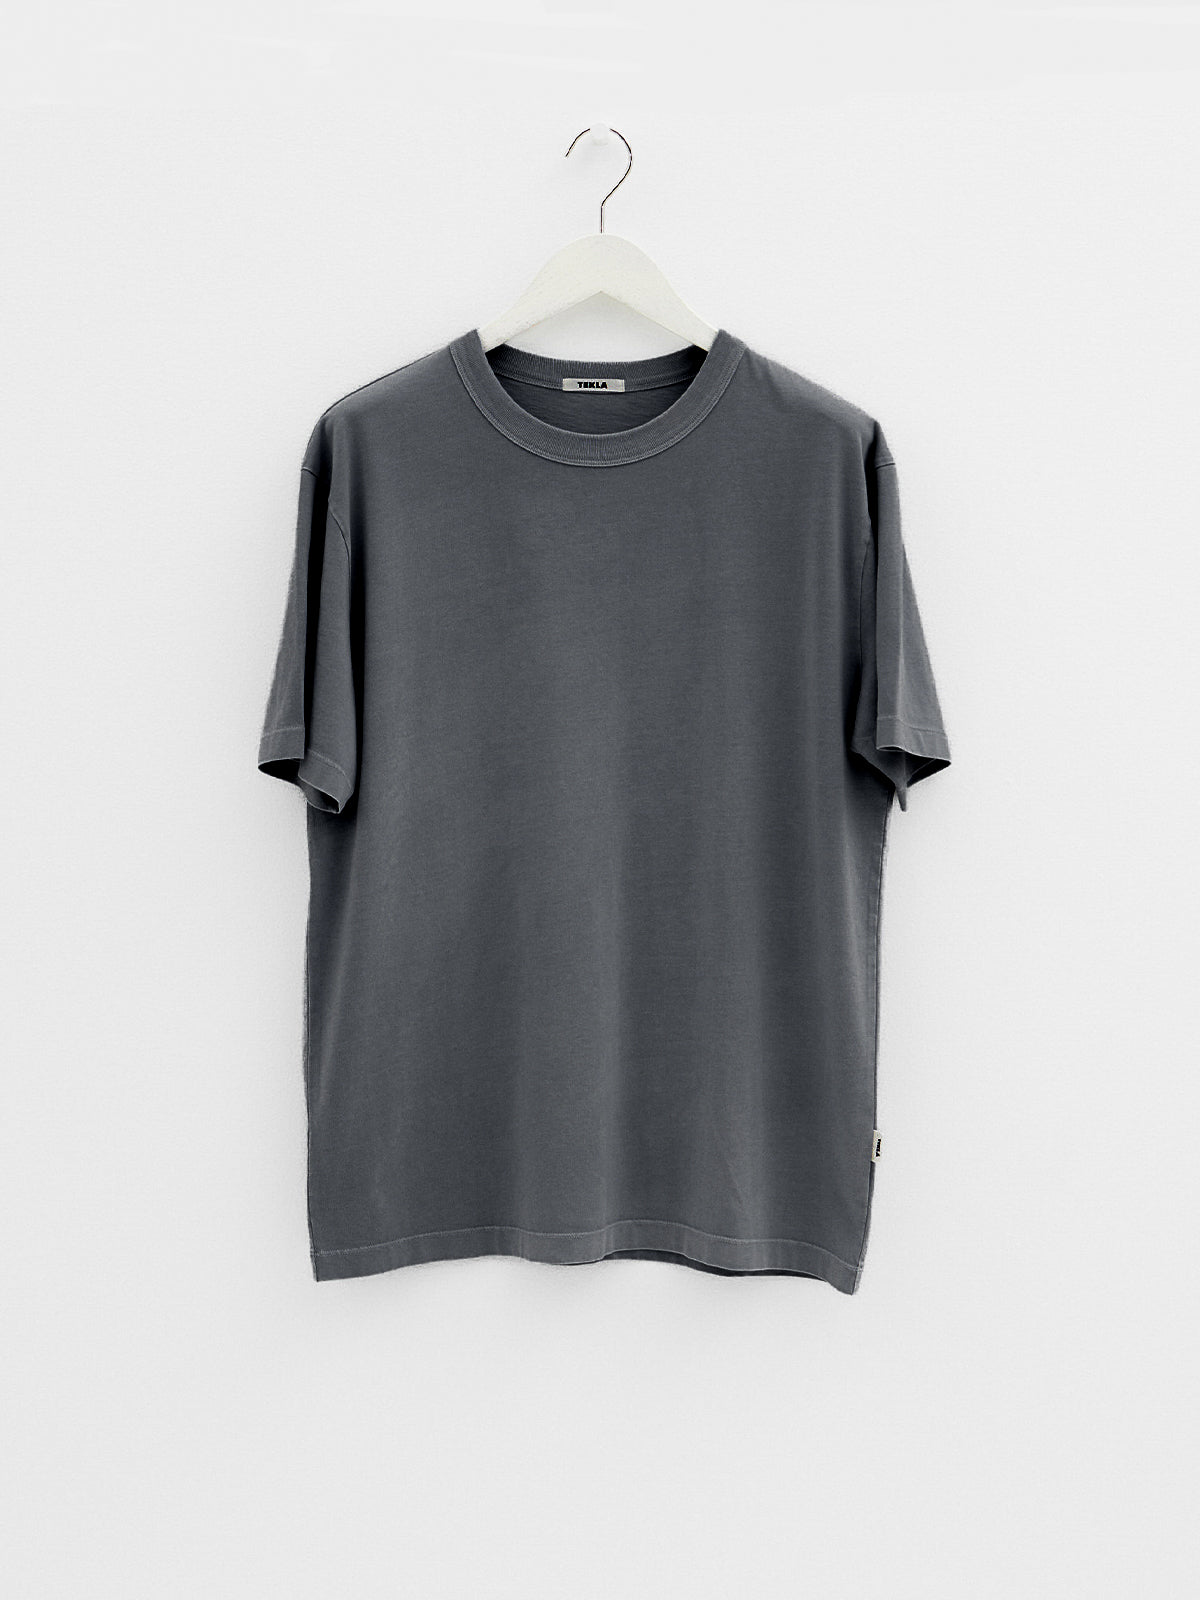 Sleeping T-Shirt in Washed Black